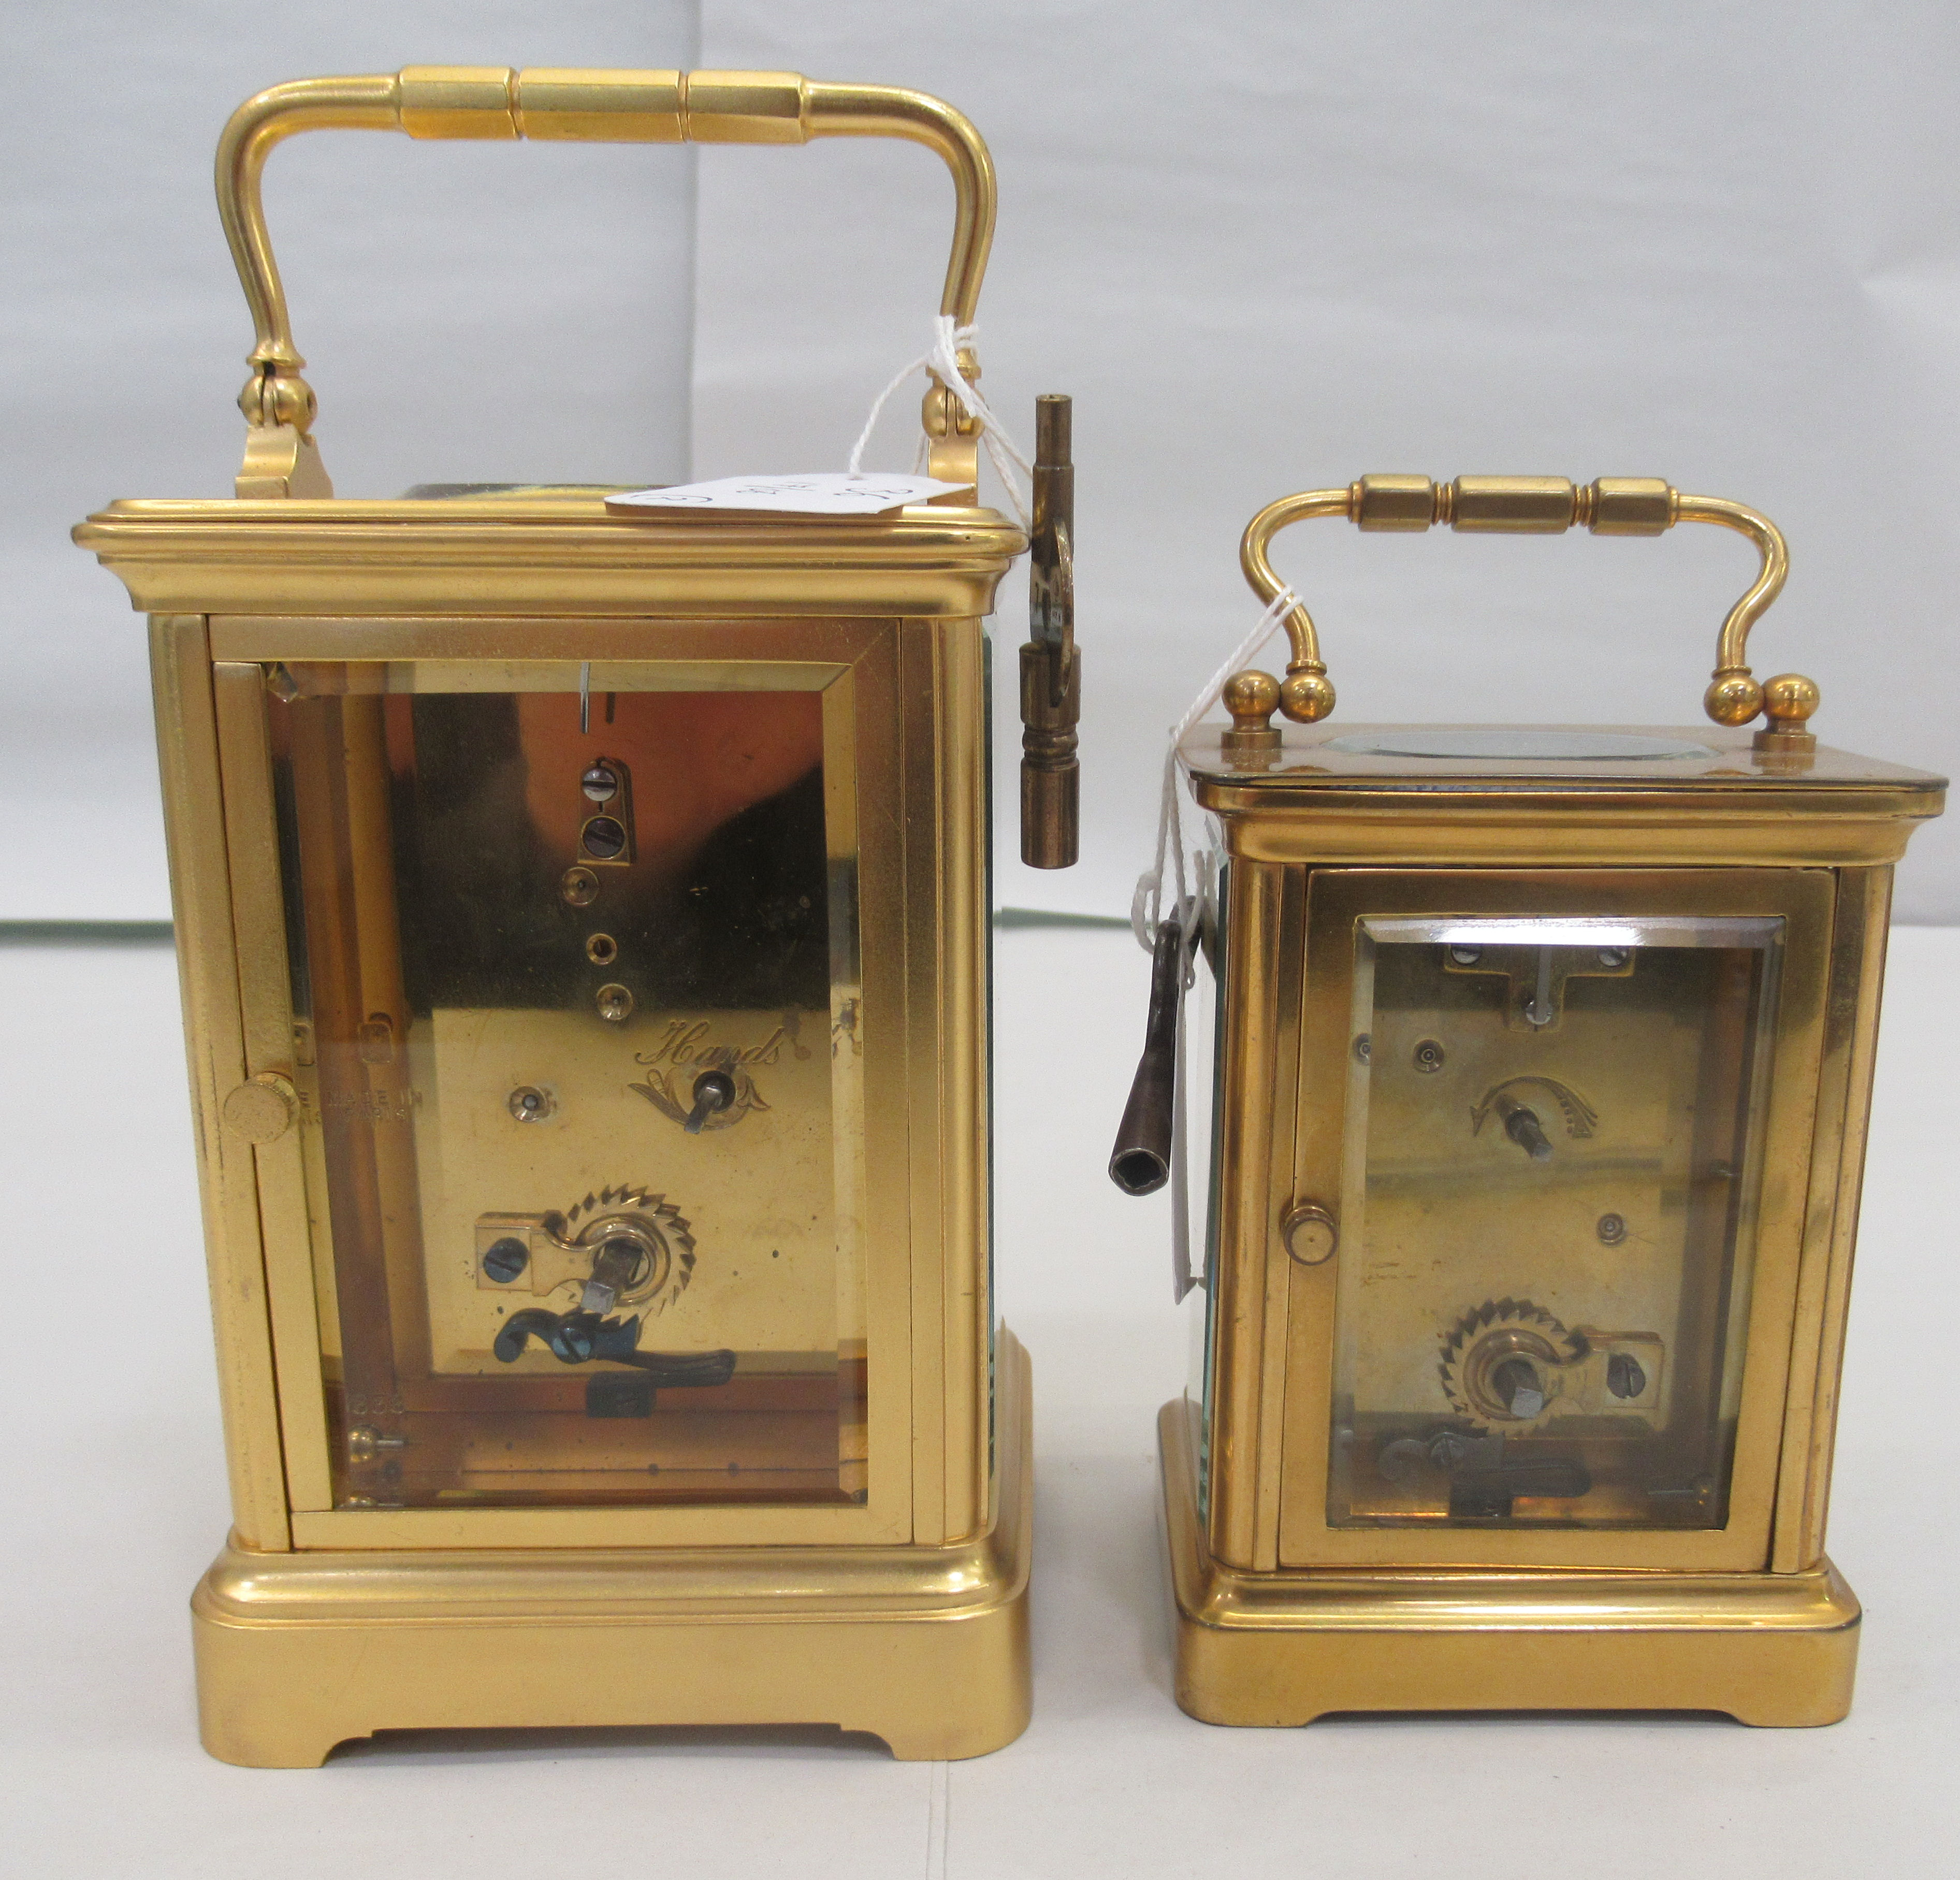 Two similar 20thC brass cased carriage timepieces with bevelled glass panels and folding top - Image 3 of 6